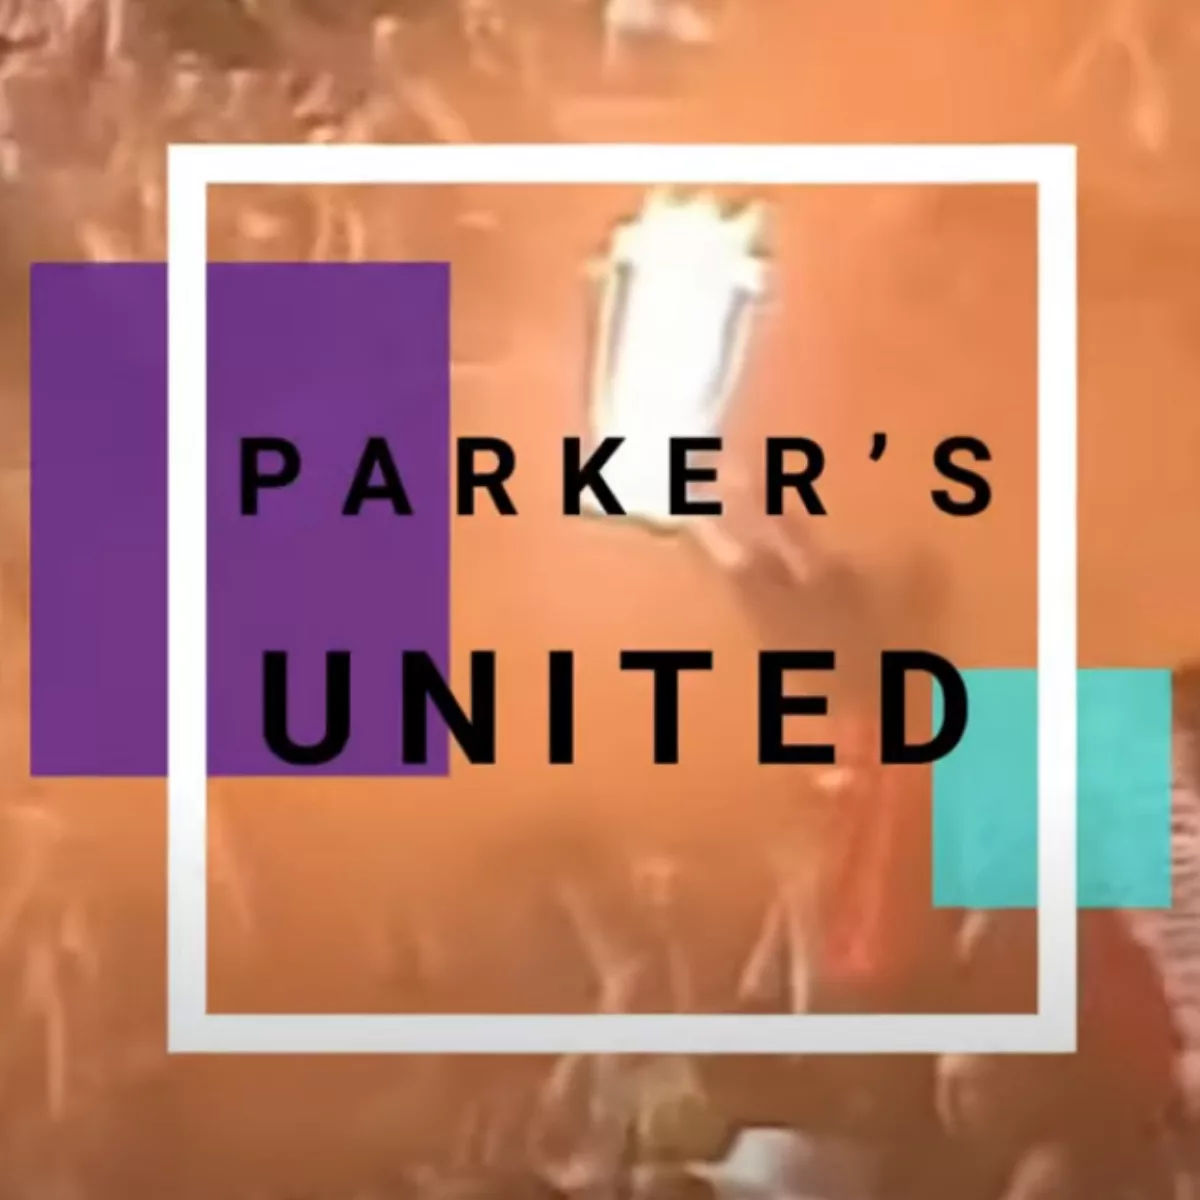 PARKERS UNITED